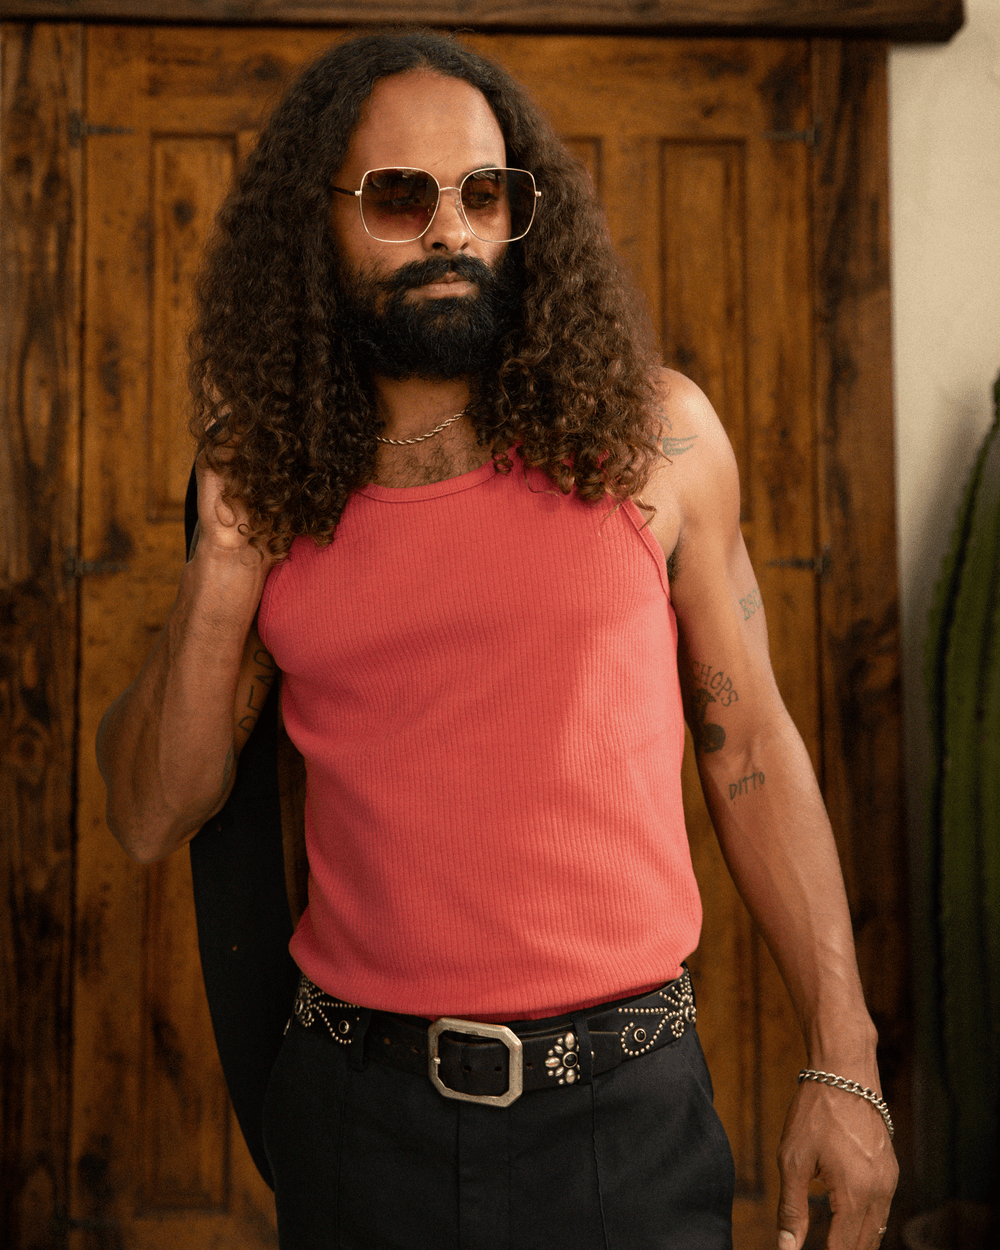 A man with long curly hair and a beard, wearing a Dandy Del Mar Milan Rib Tank in Currant with dropped armholes, aviator sunglasses, and a belt with a large buckle stands confidently in a room with wooden floors.